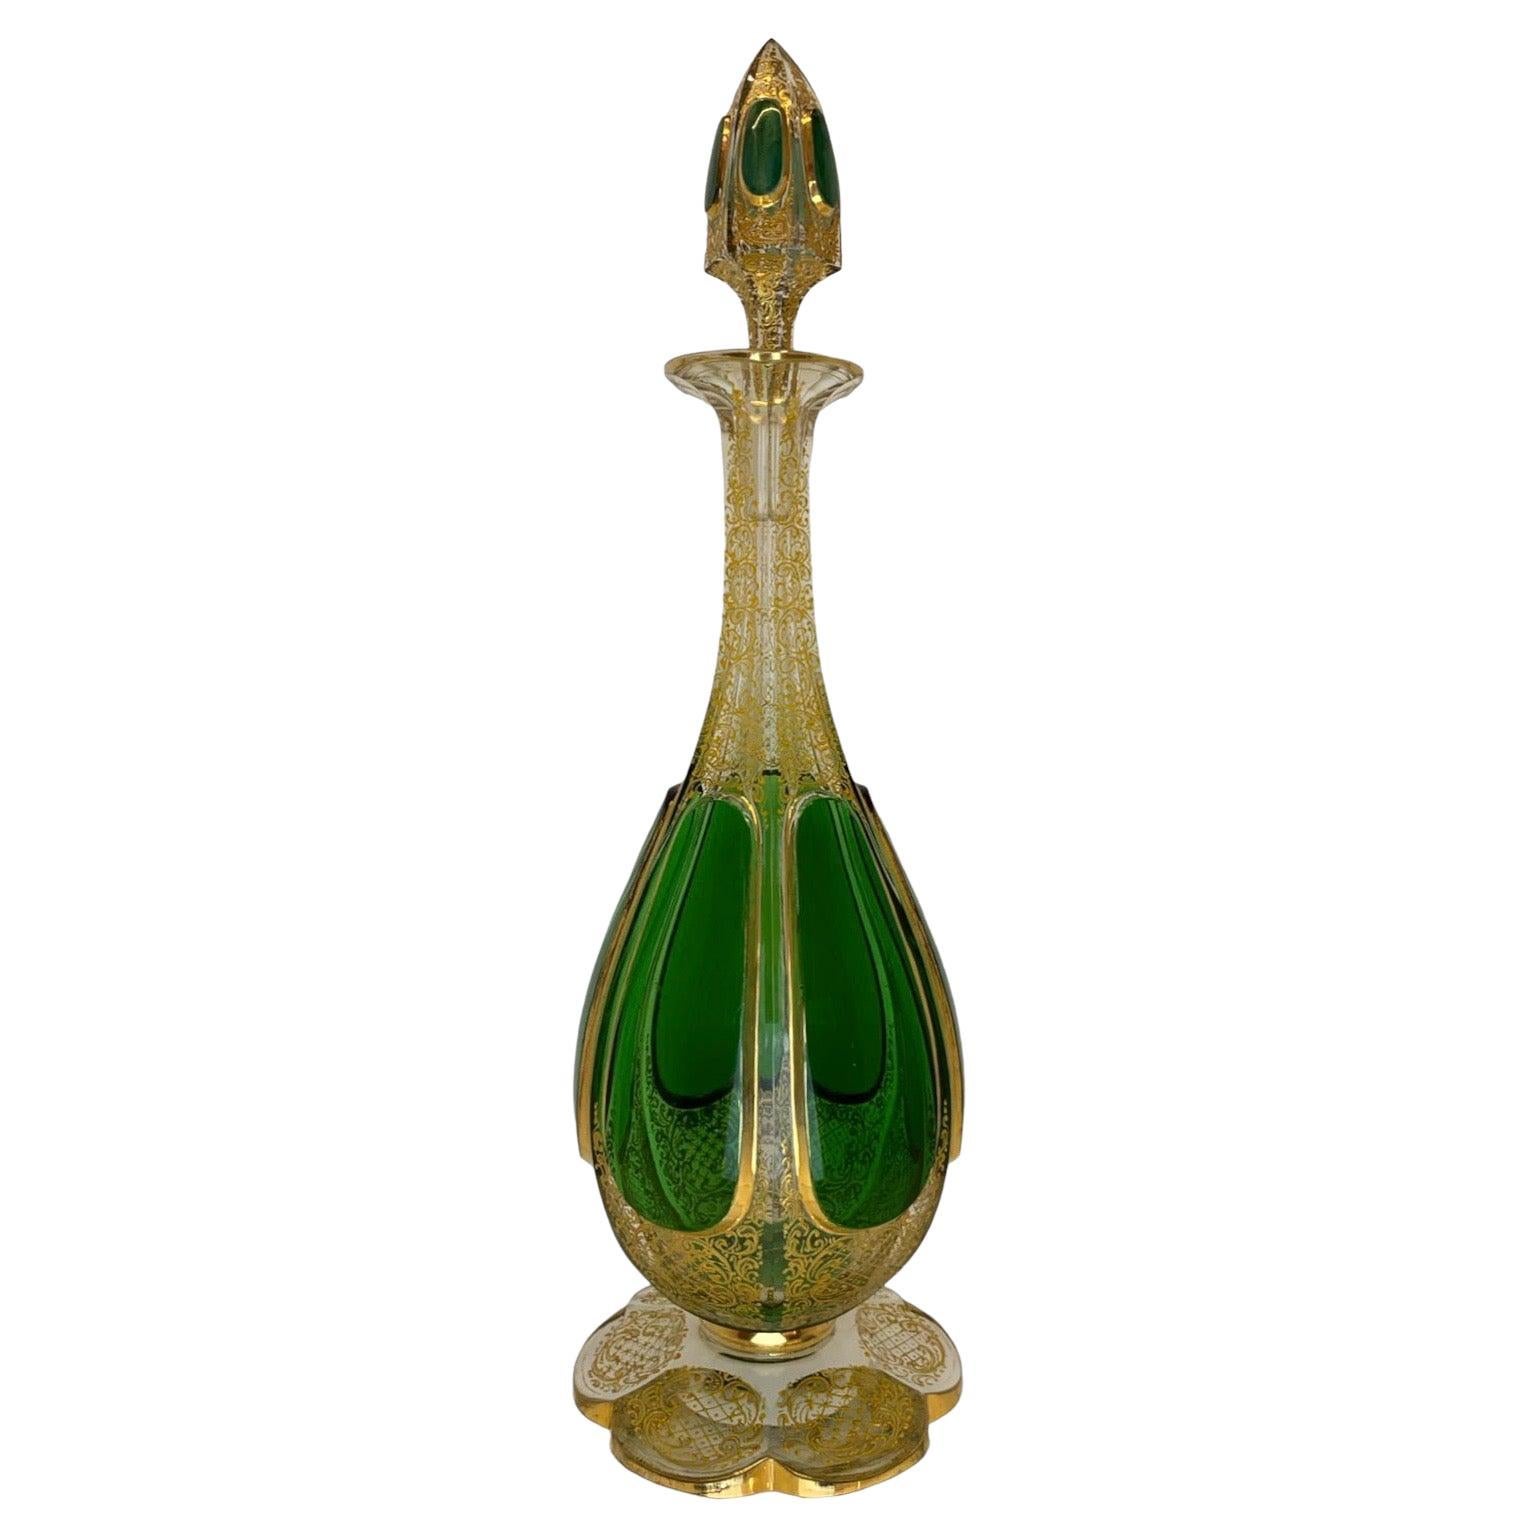 A Large Bohemian green cut to clear glass decanter with stopper

Cased Glass with Emerald Green Cabochons Panels

Green Cut to Clear in Three Layer Cased Glass.

Decorated with Composite Gold Enamel Scroll Work

Moser, 19th Century

40 cm